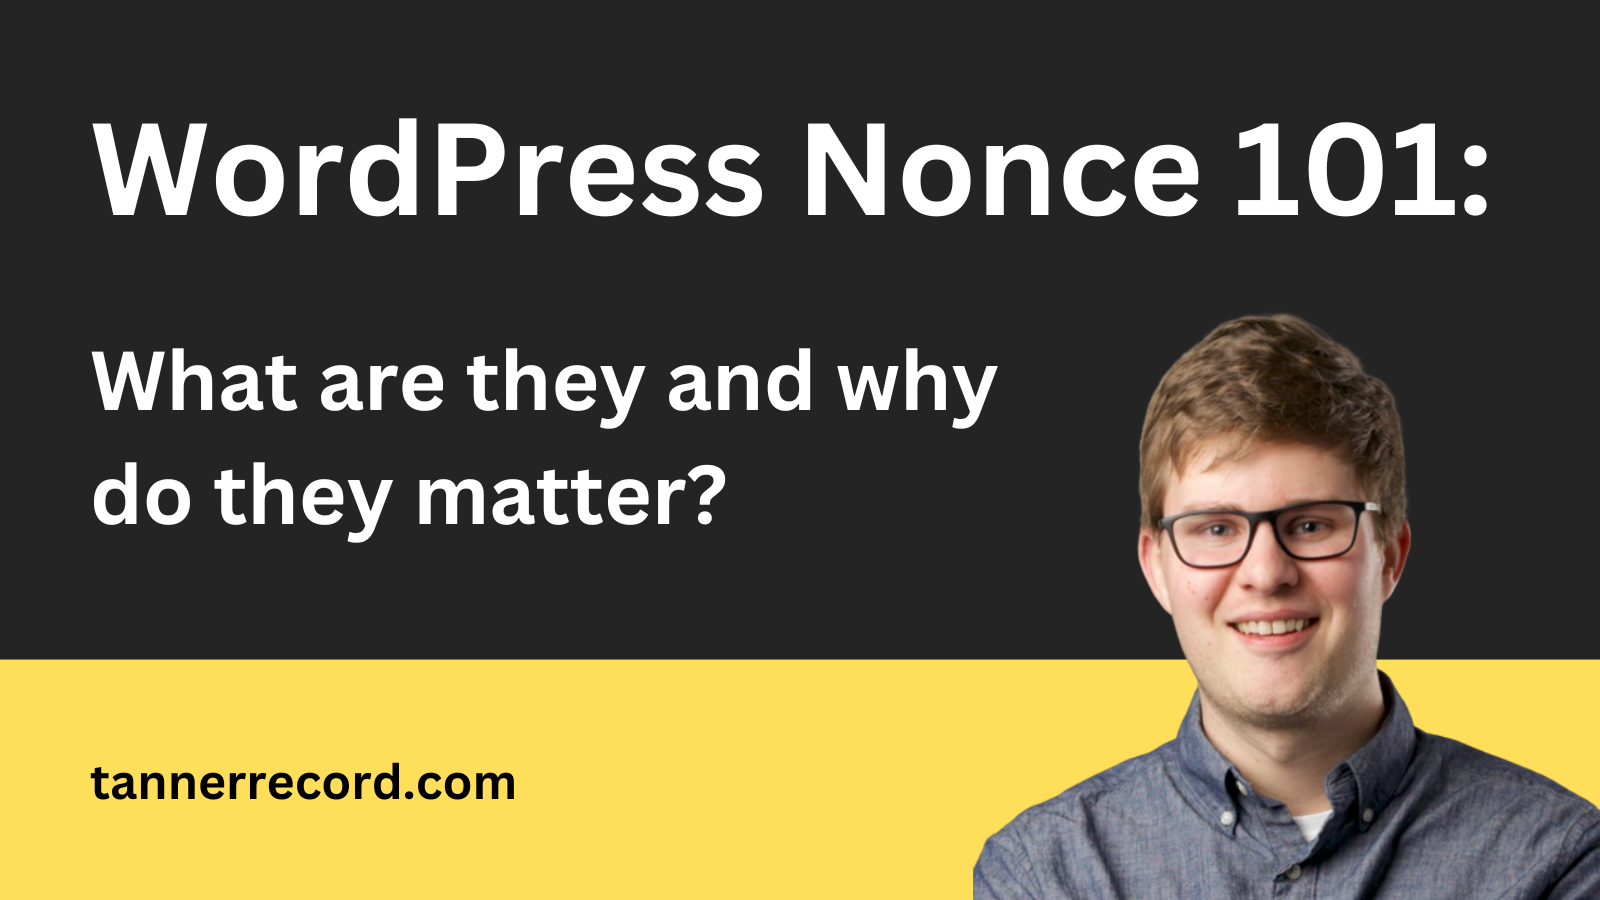 WordPress Nonce 101: What are they and why do they matter?